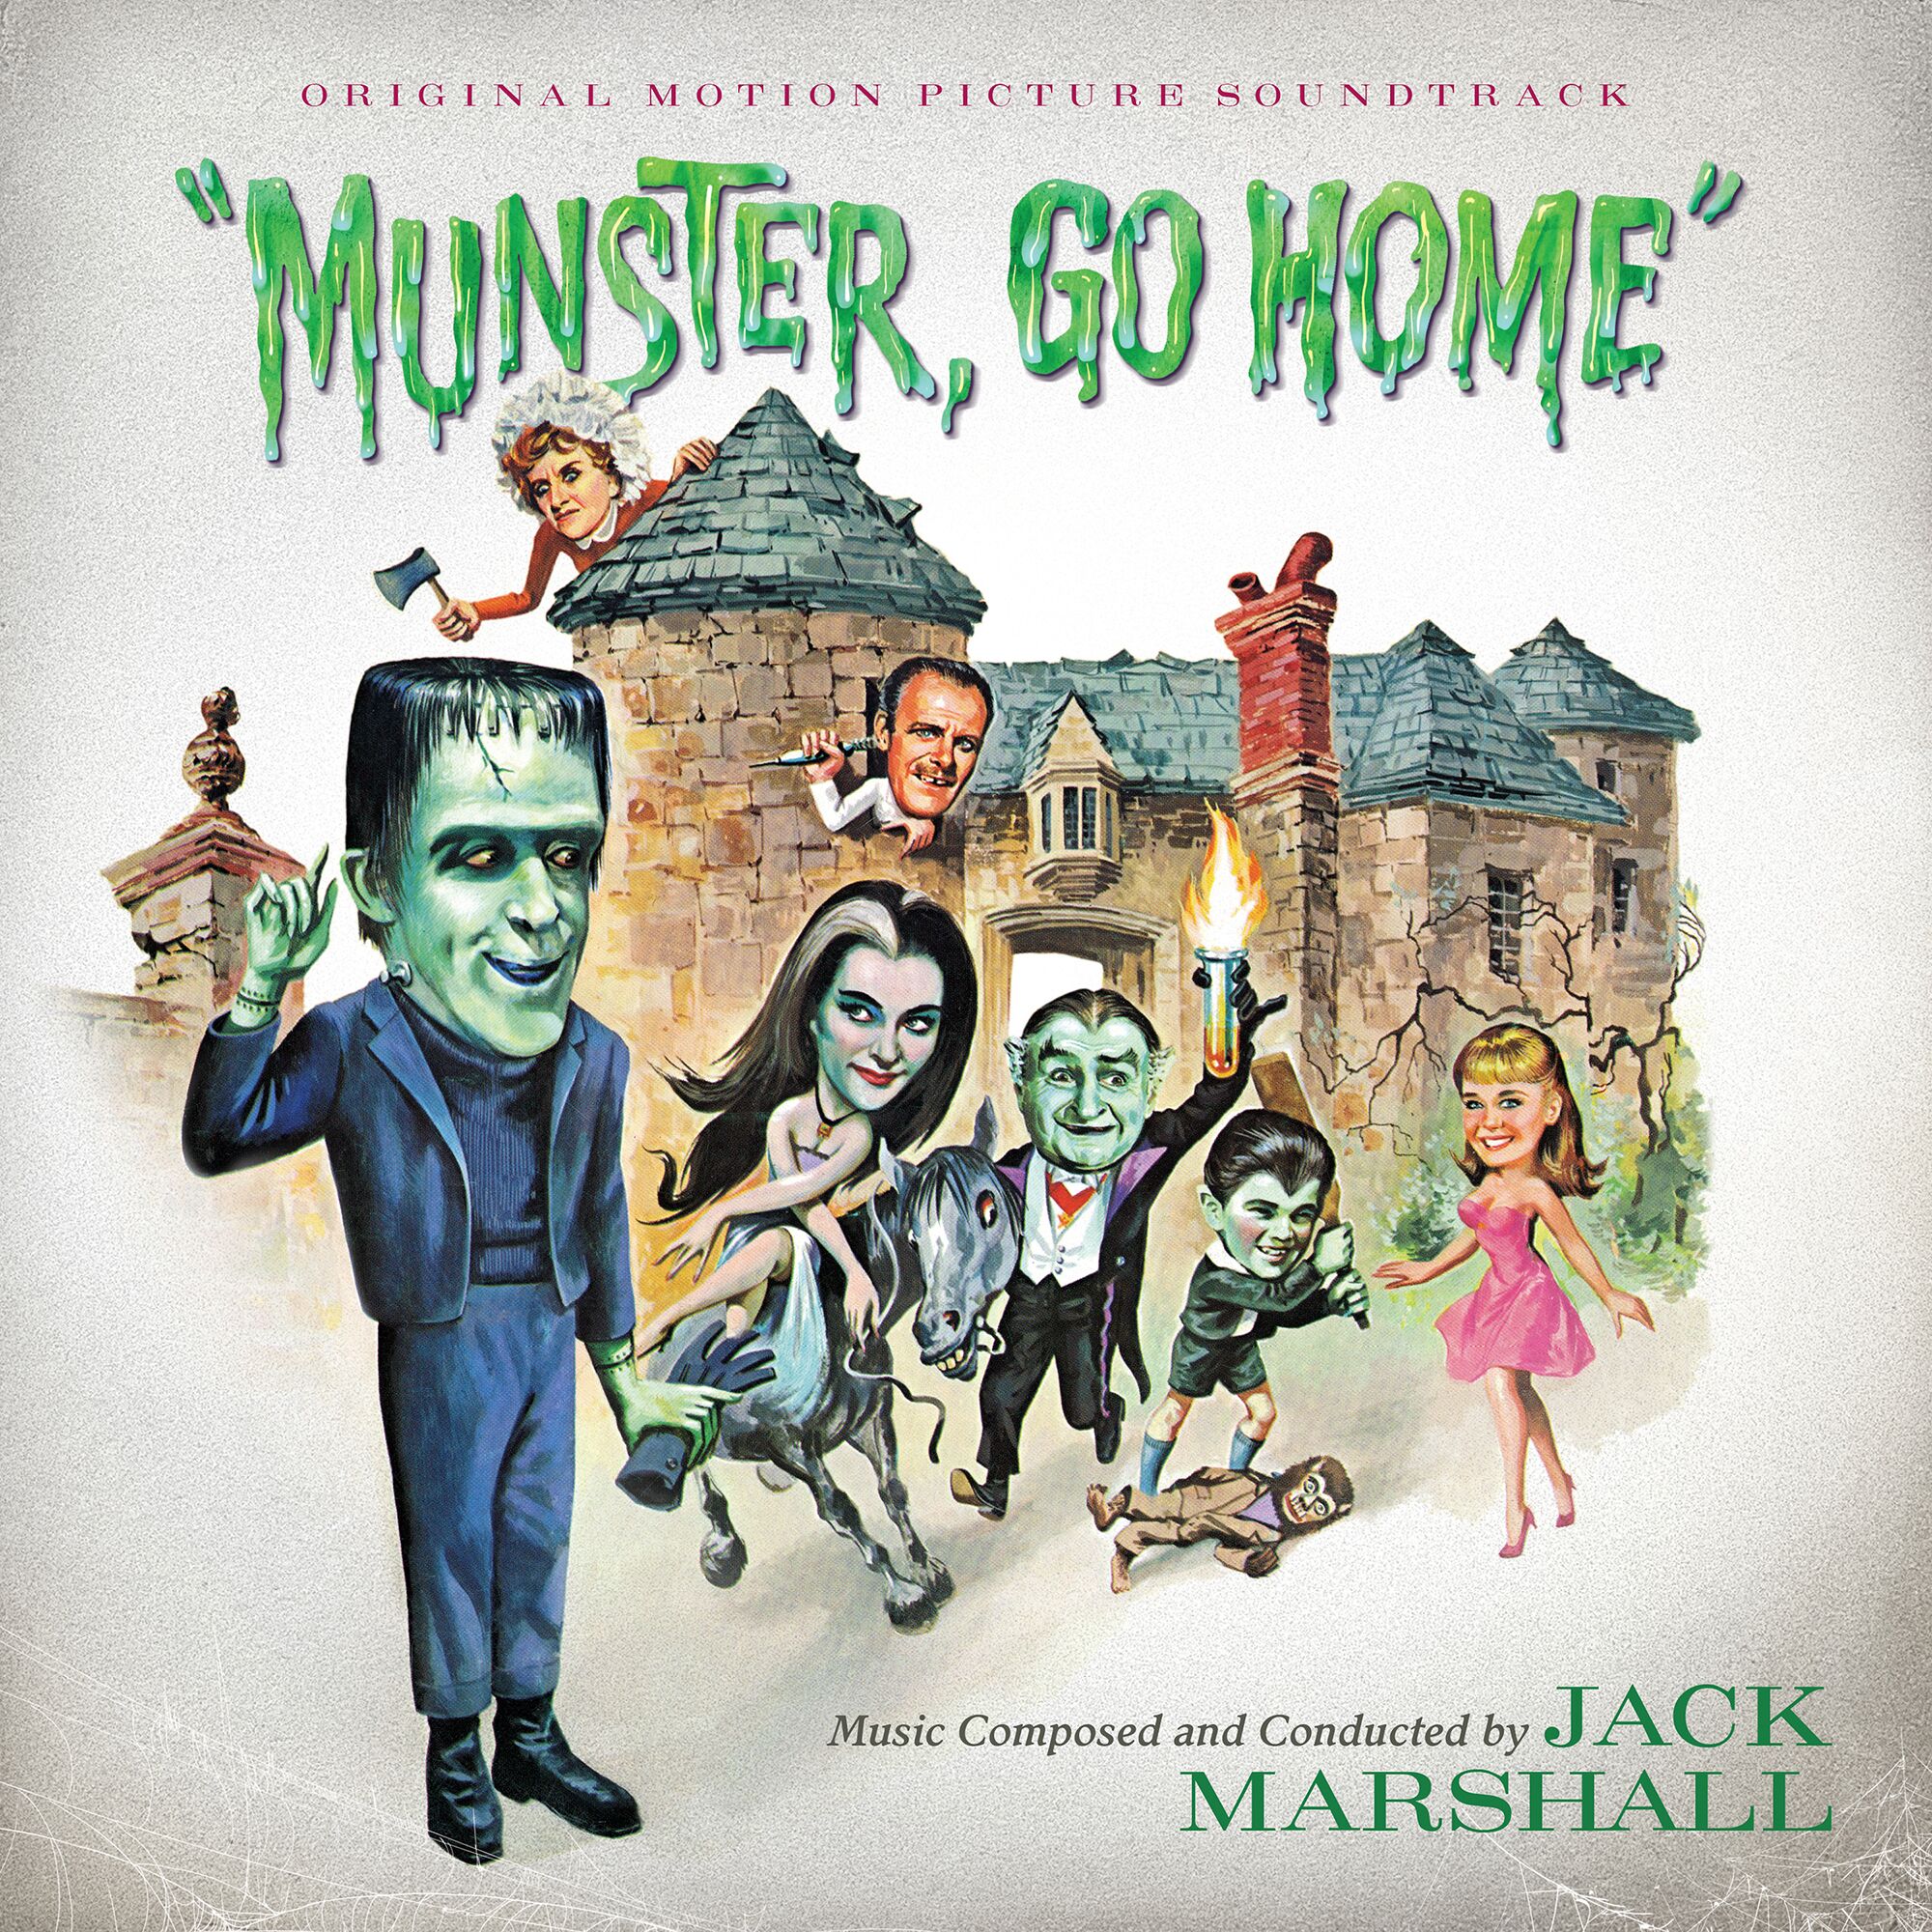 "Munster, Go Home" music composed and conducted by Jack Marshall.